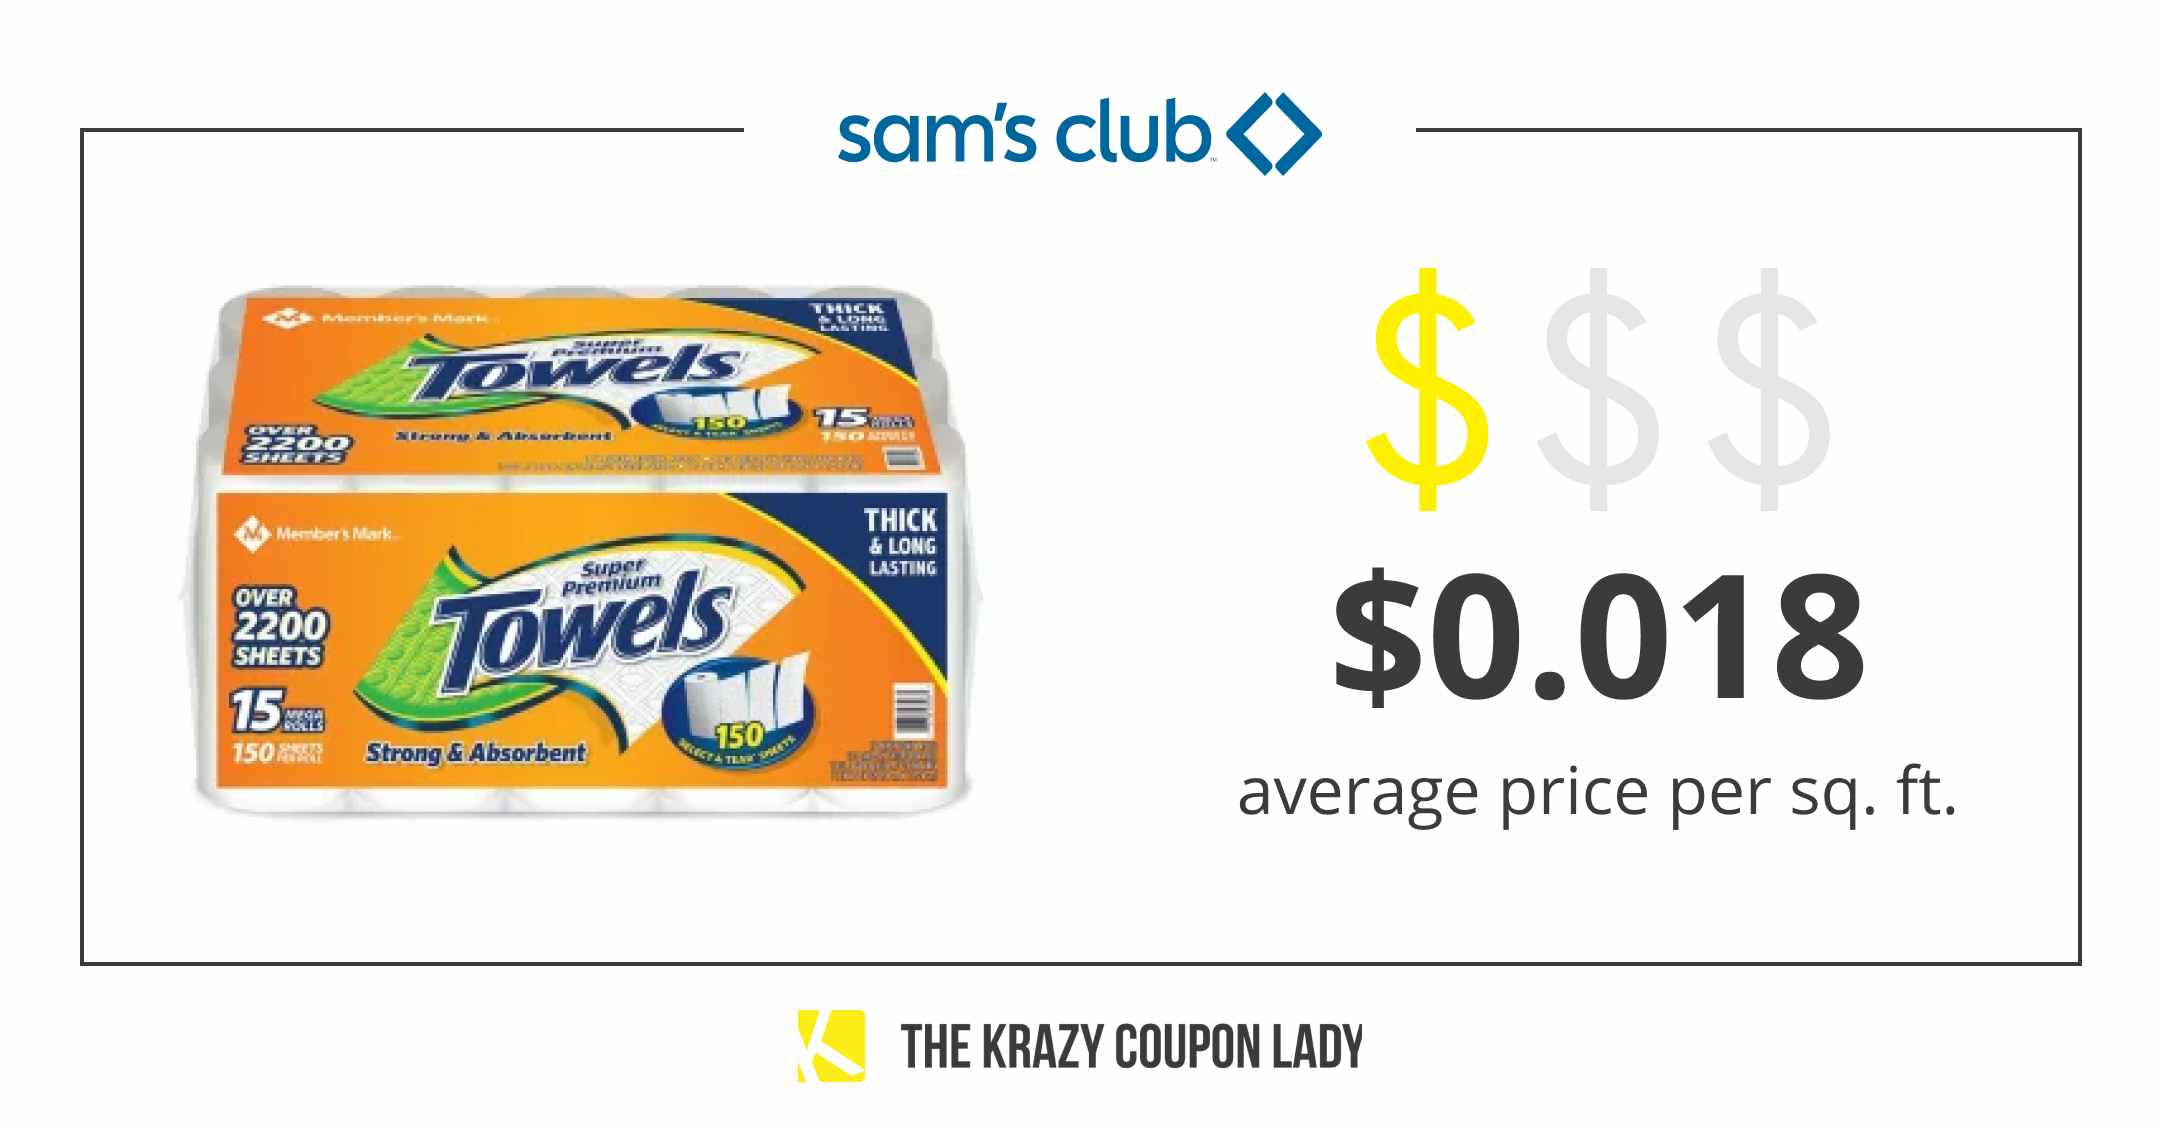 https://prod-cdn-thekrazycouponlady.imgix.net/wp-content/uploads/2022/02/get-cheapest-paper-towels-sams-club-price-square-foot-graphic-1673983013-1673983013.png?auto=format&fit=fill&q=25